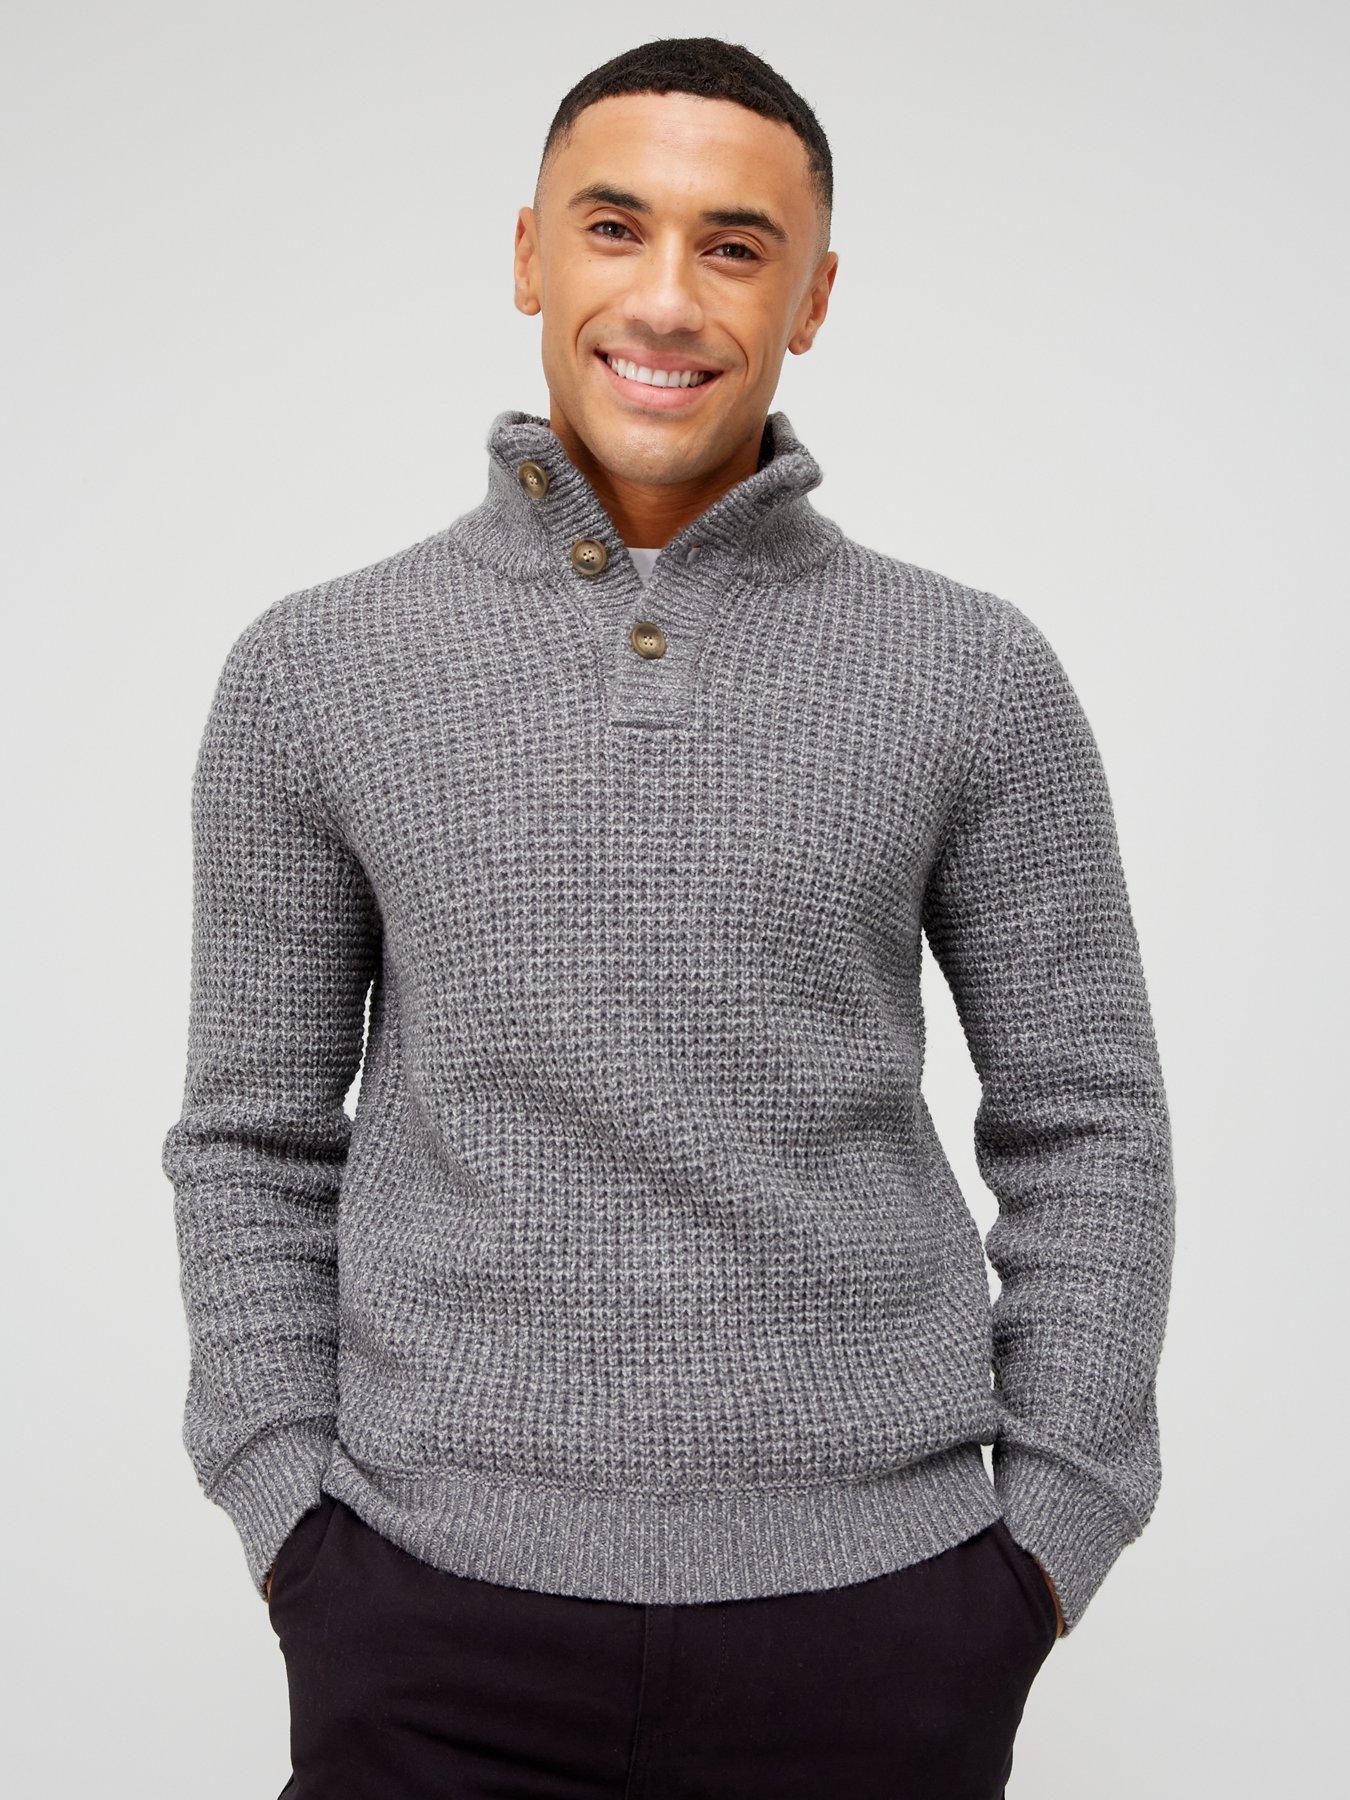 discount 85% Pull&Bear jumper Gray M MEN FASHION Jumpers & Sweatshirts Knitted 